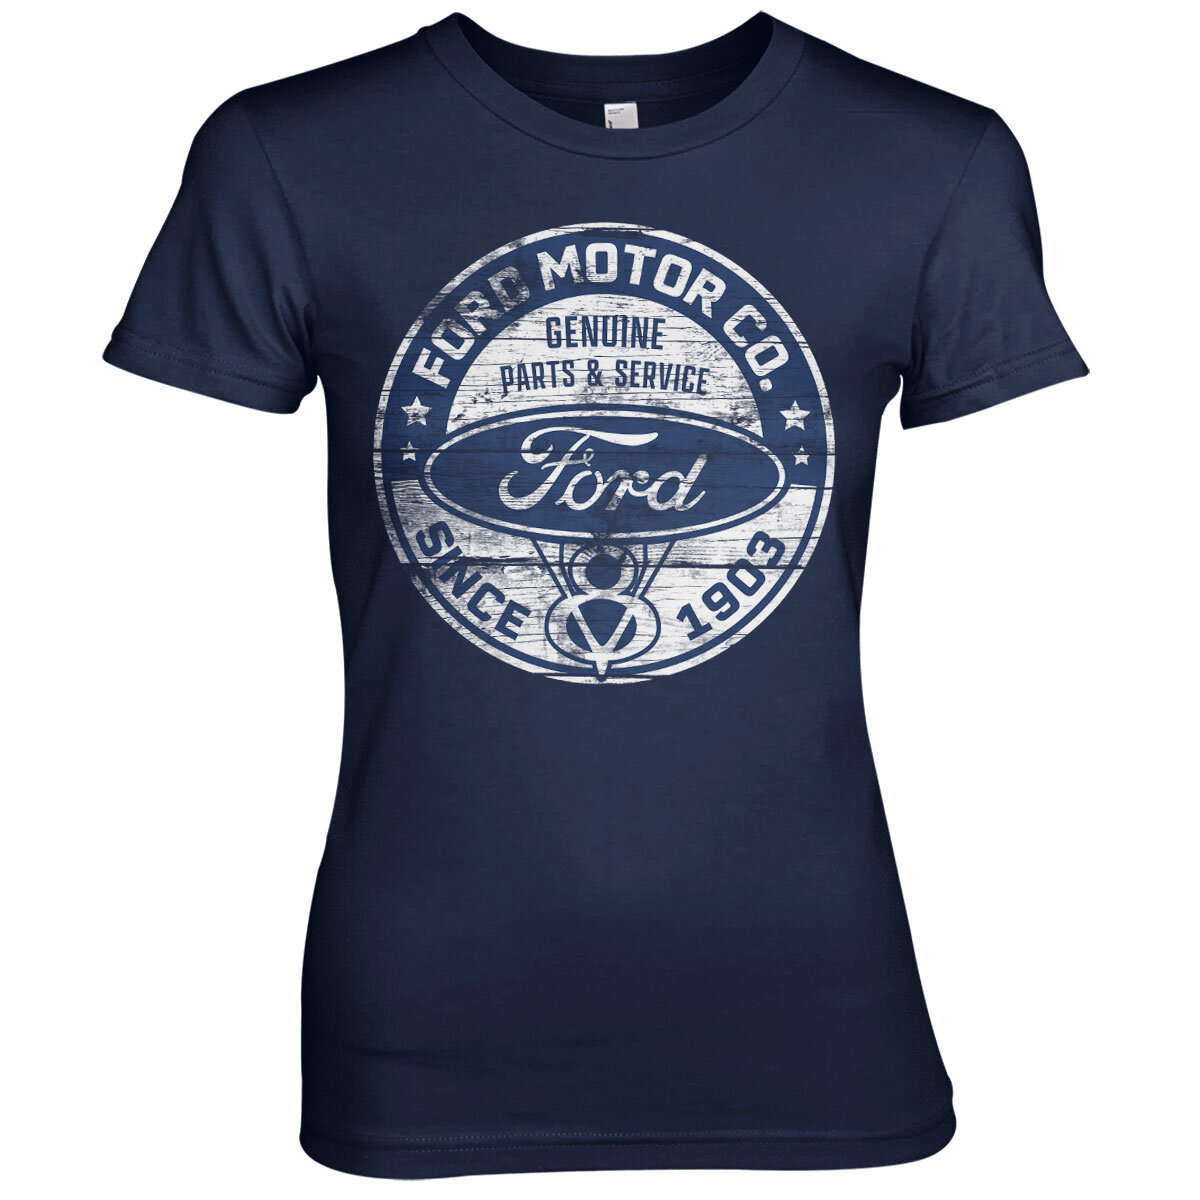 Ford Motor Co. Since 1903 Girly Tee